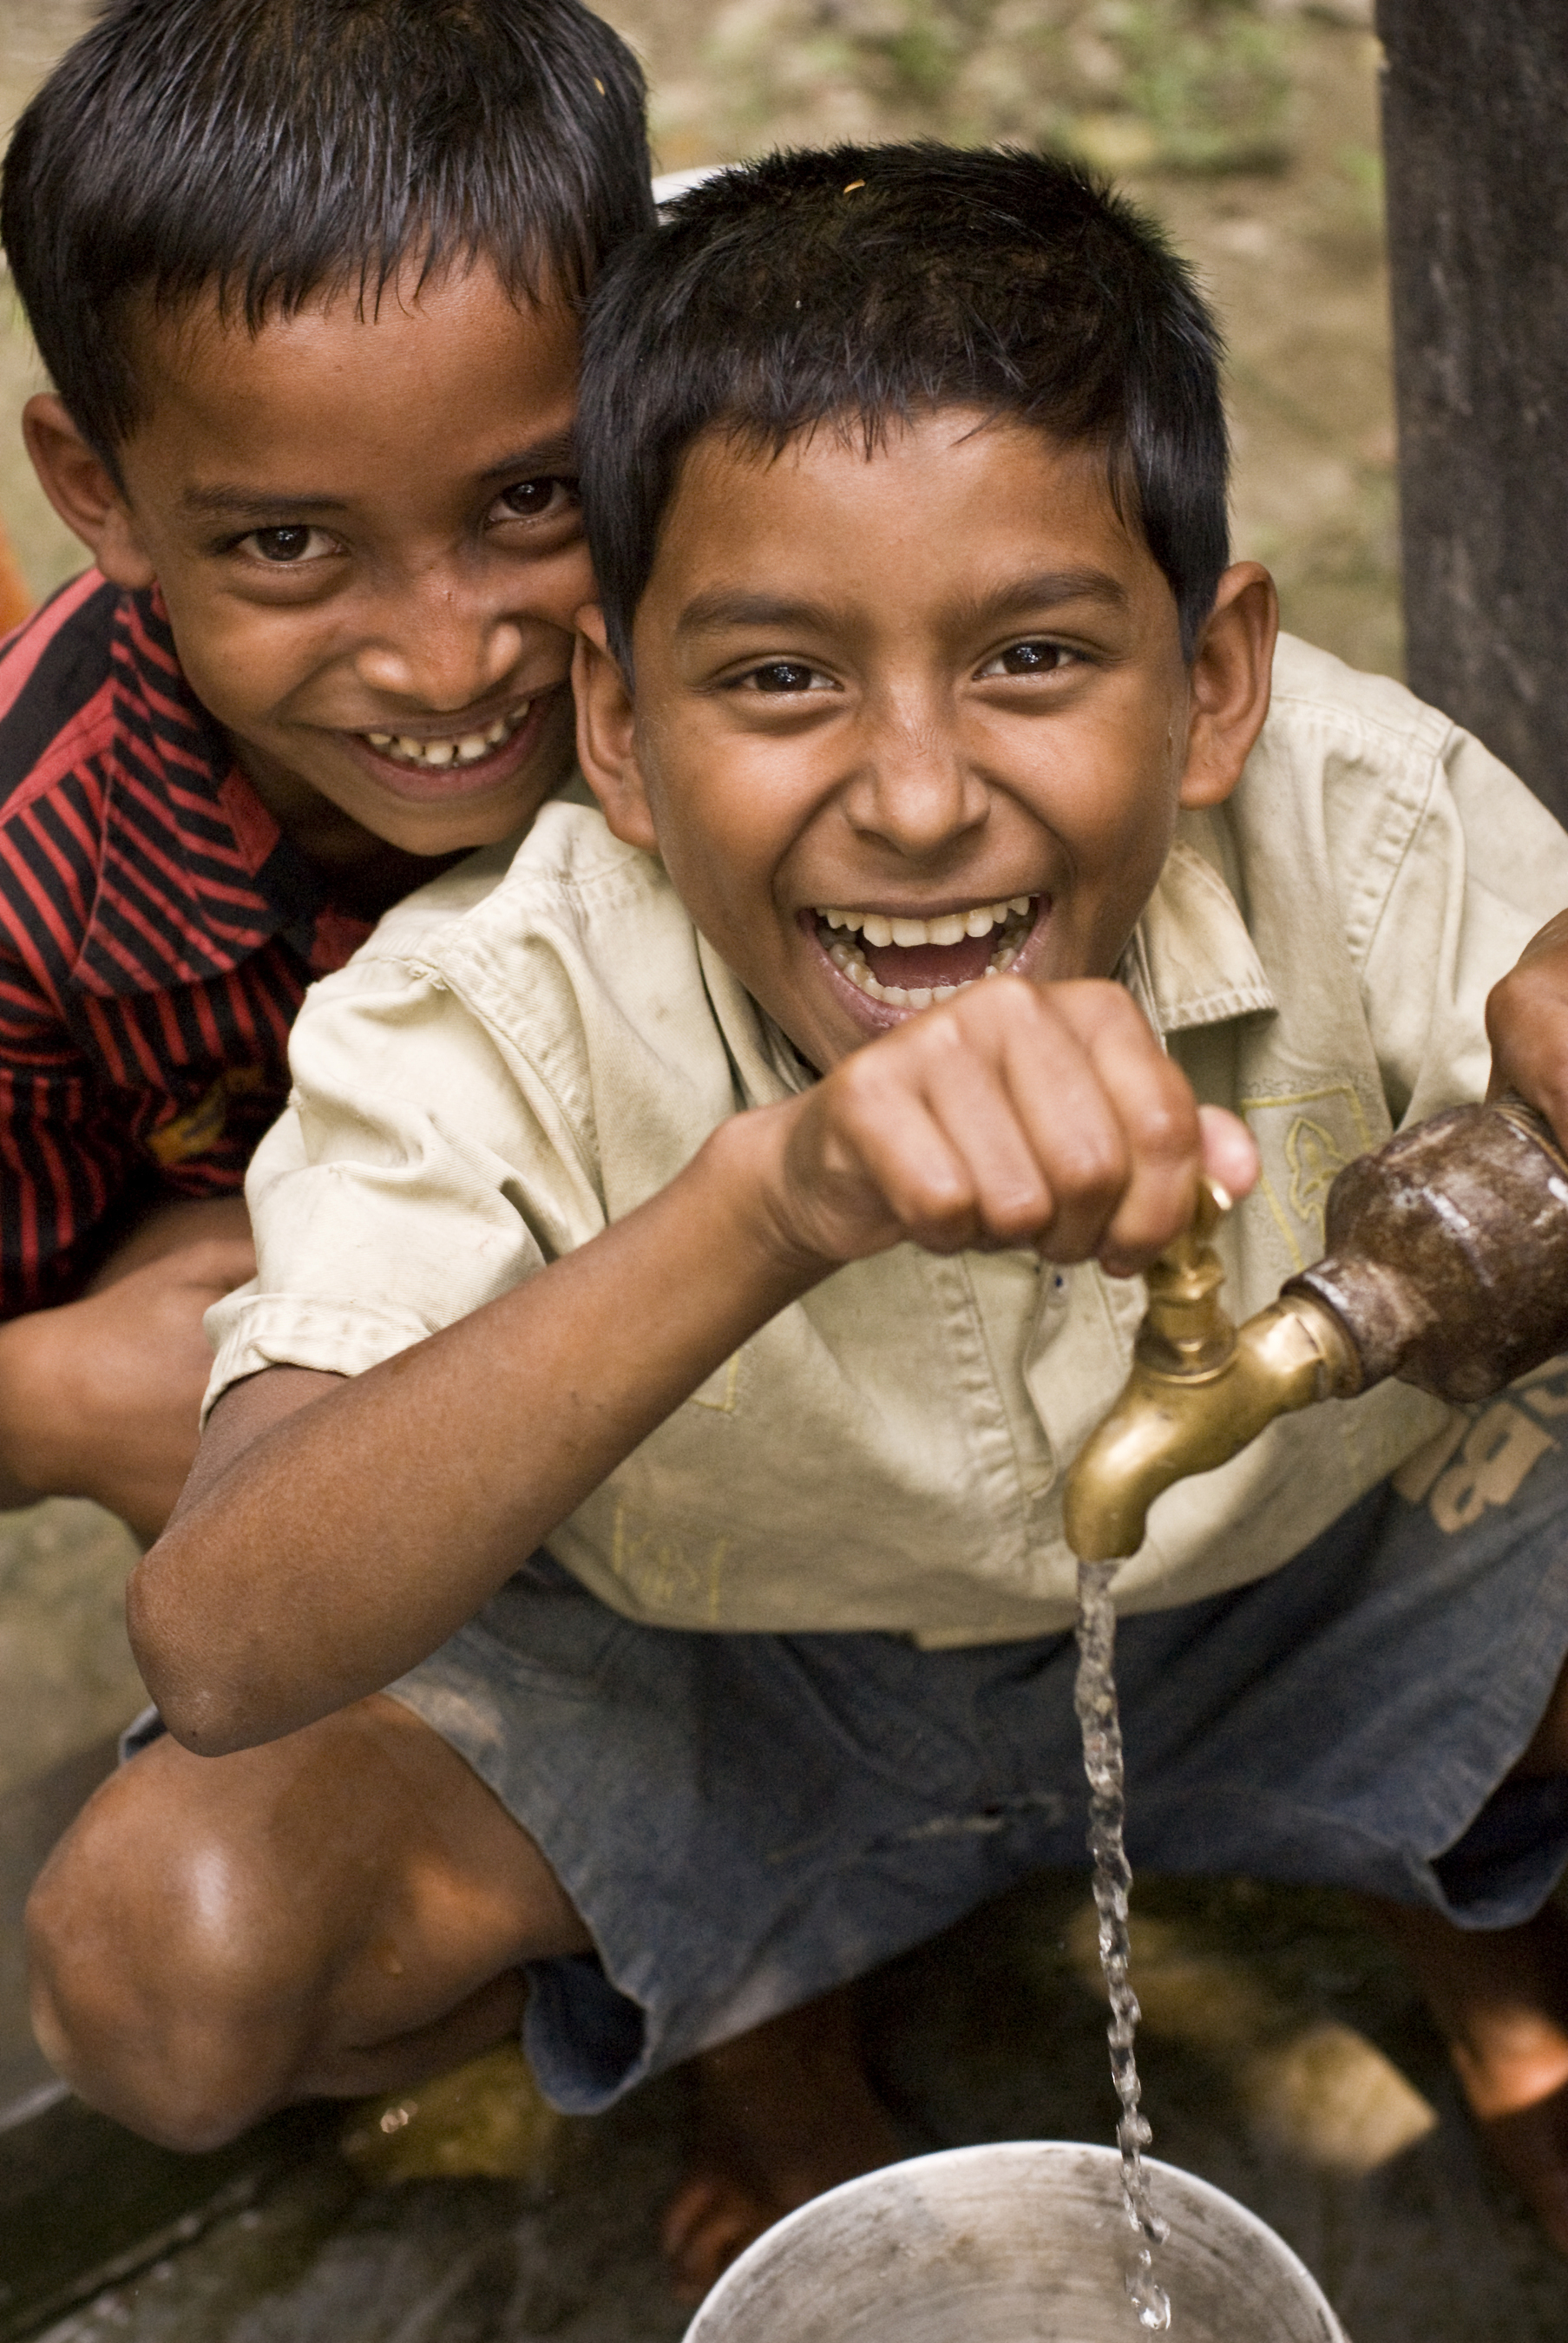 SMI’s project will fund a school’s piped water system in Bangladesh. (PRNewsFoto/SMI)